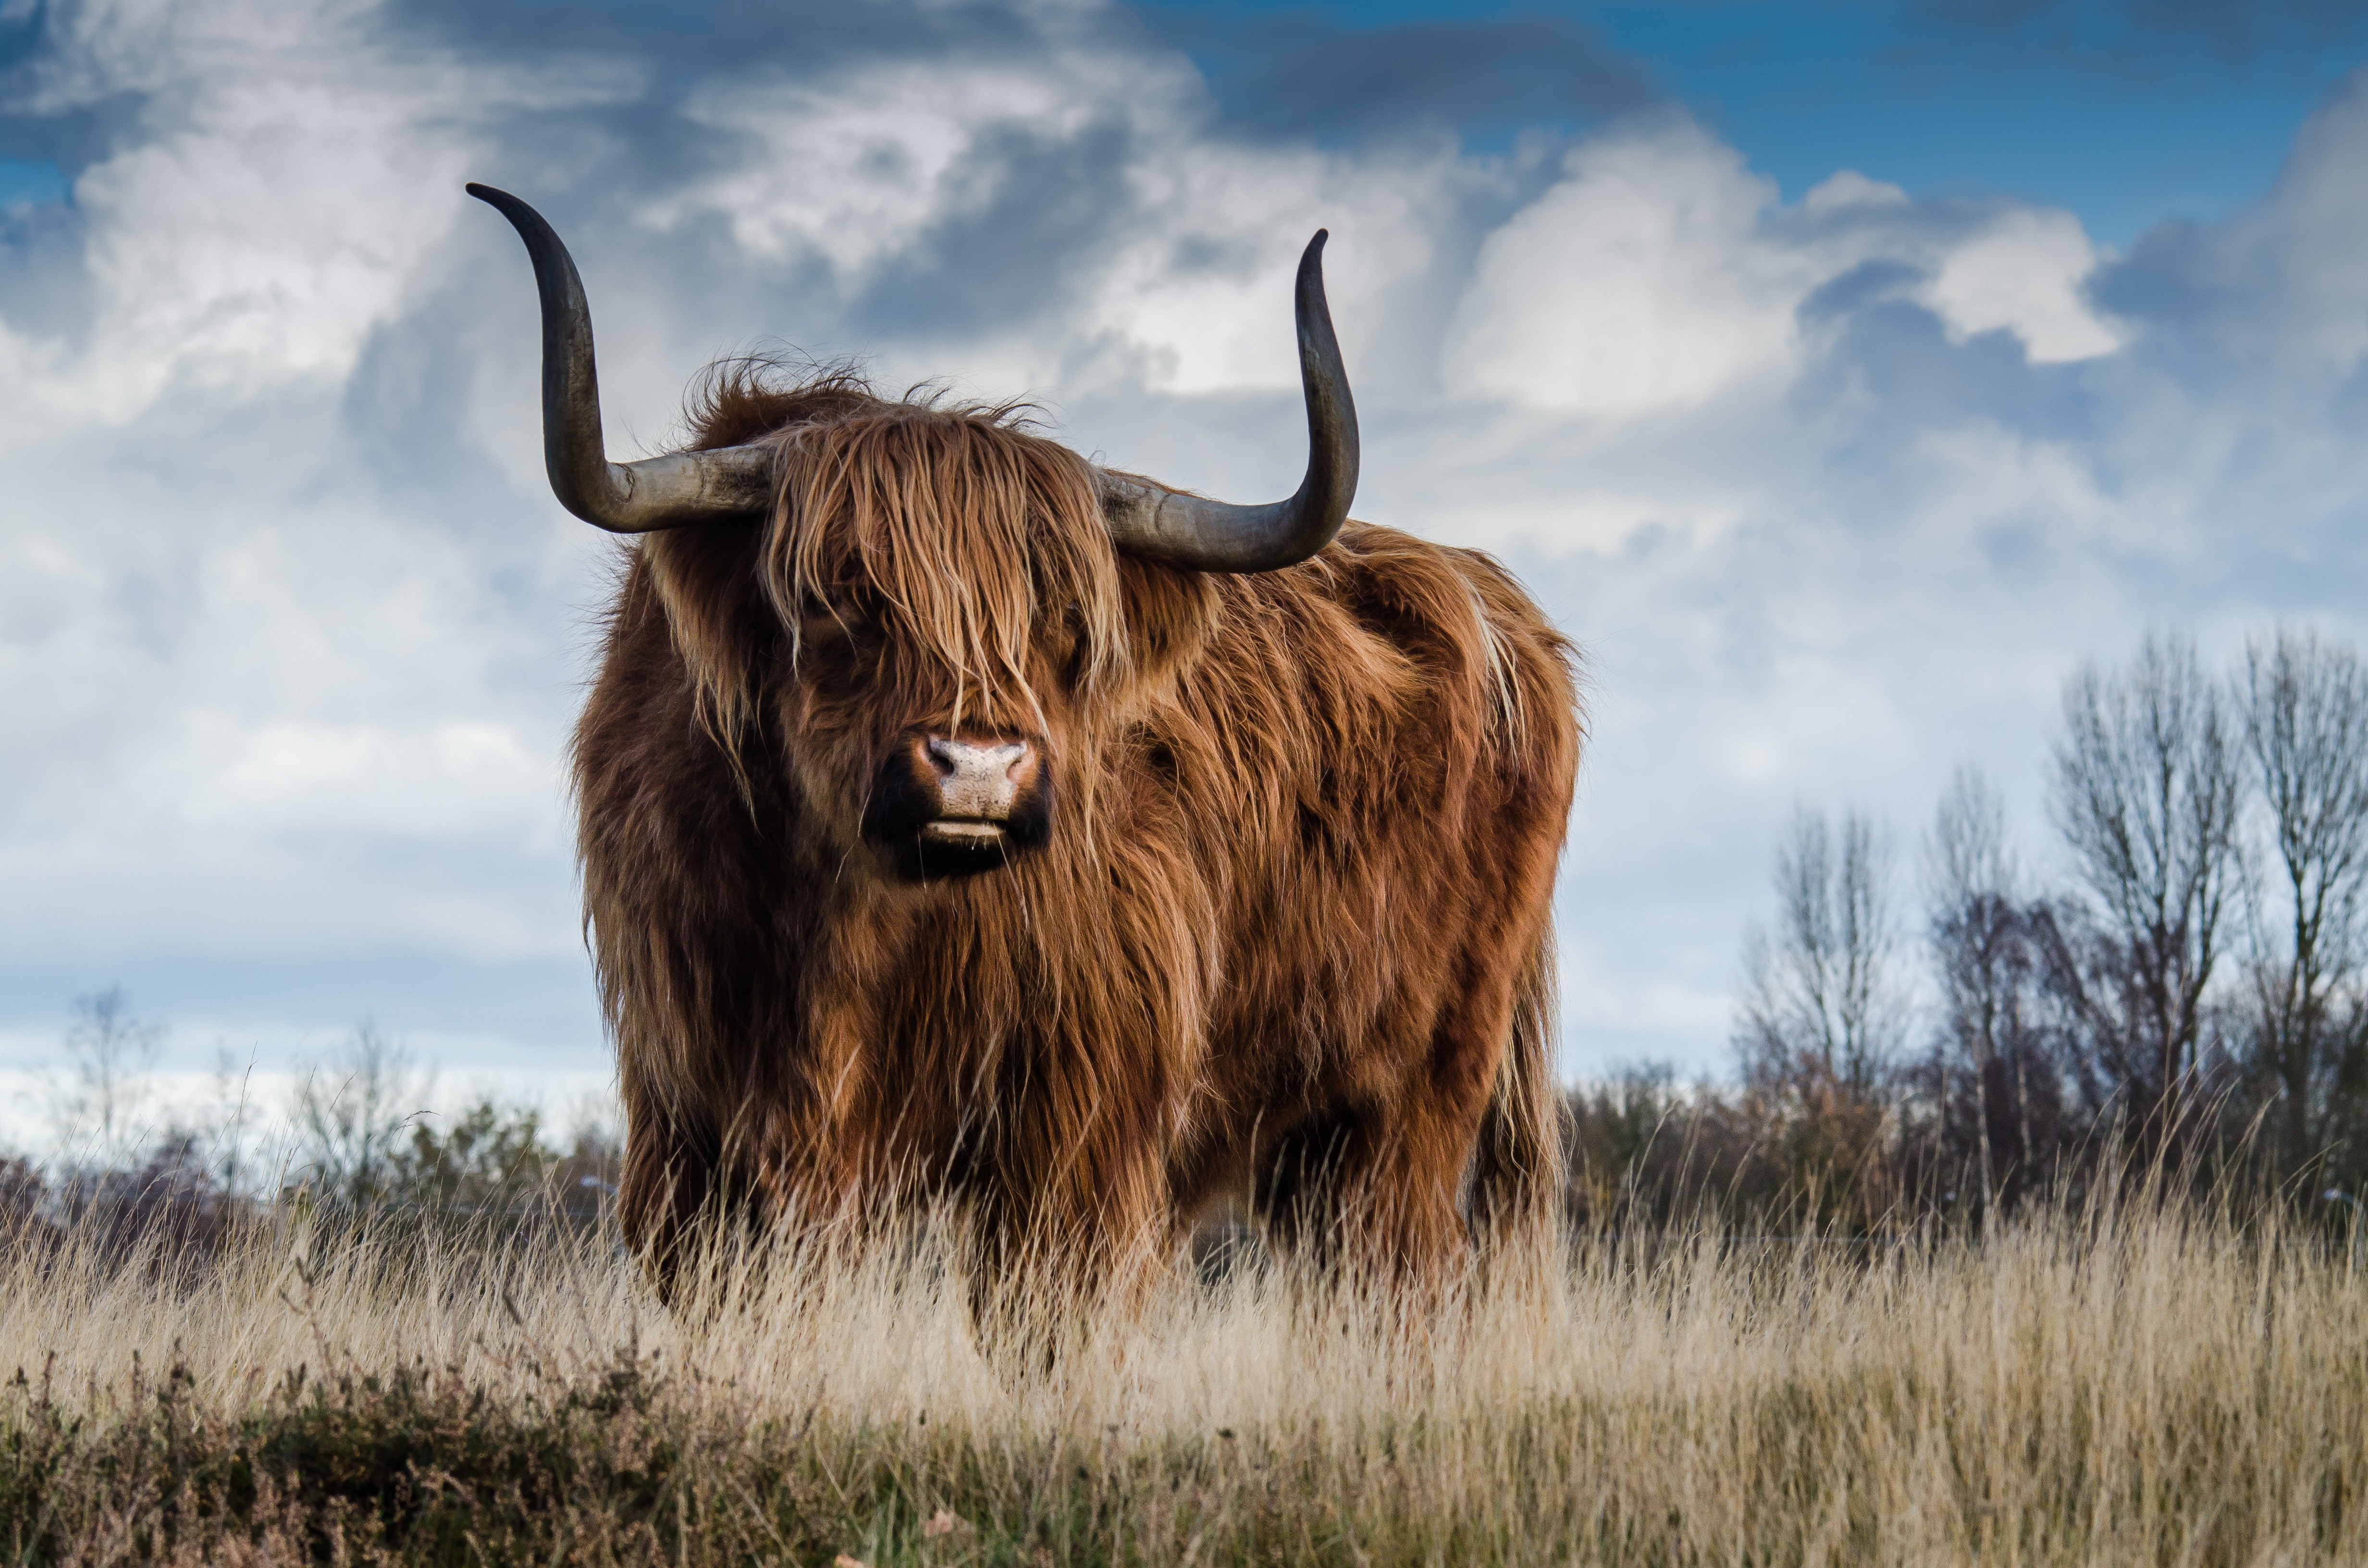 Brown bull on green glass field under grey and blue cloudy sky photo